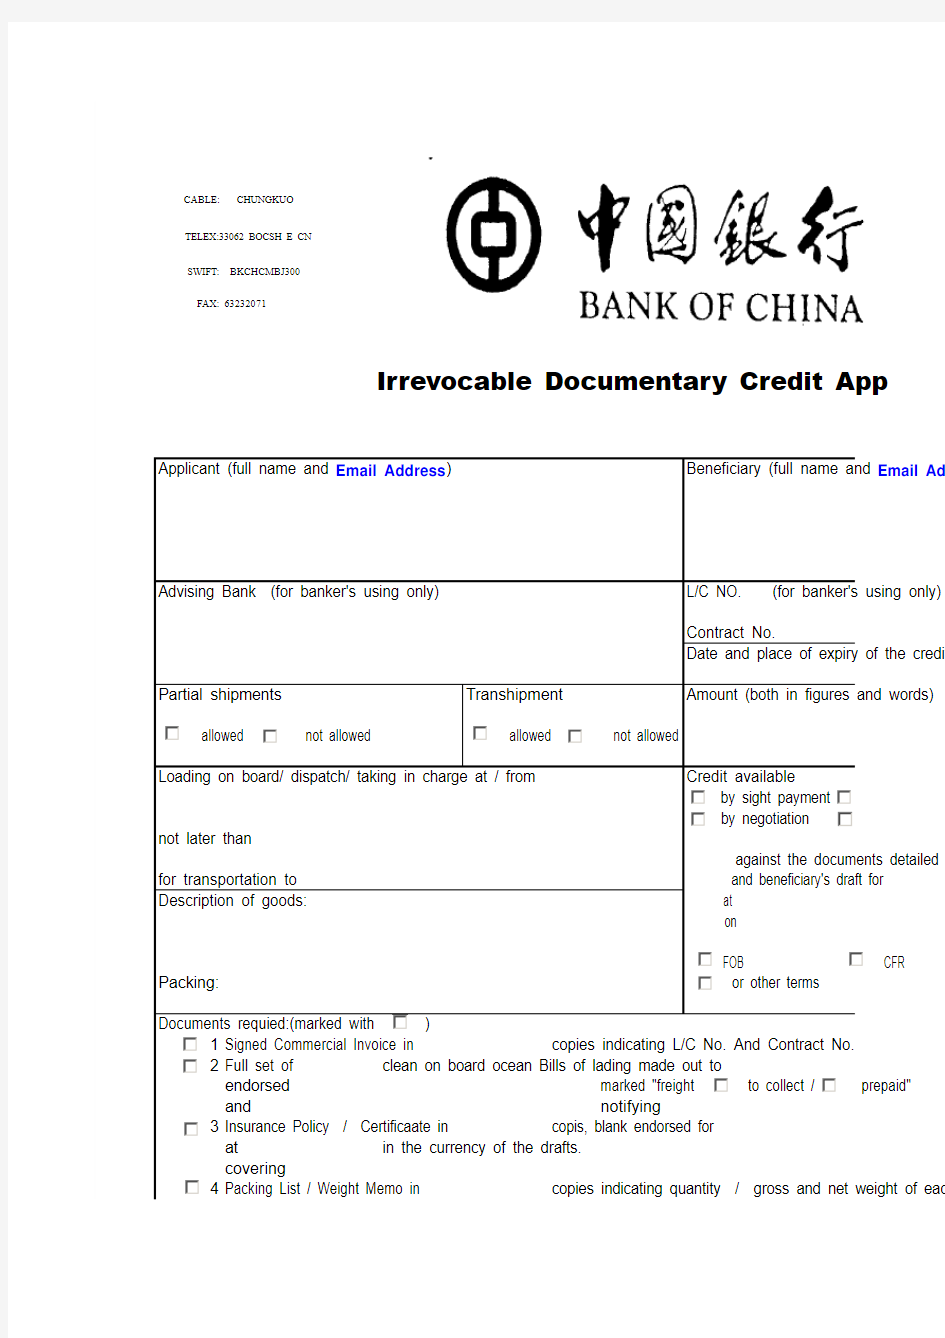 Irrevocable Documentary Credit Application